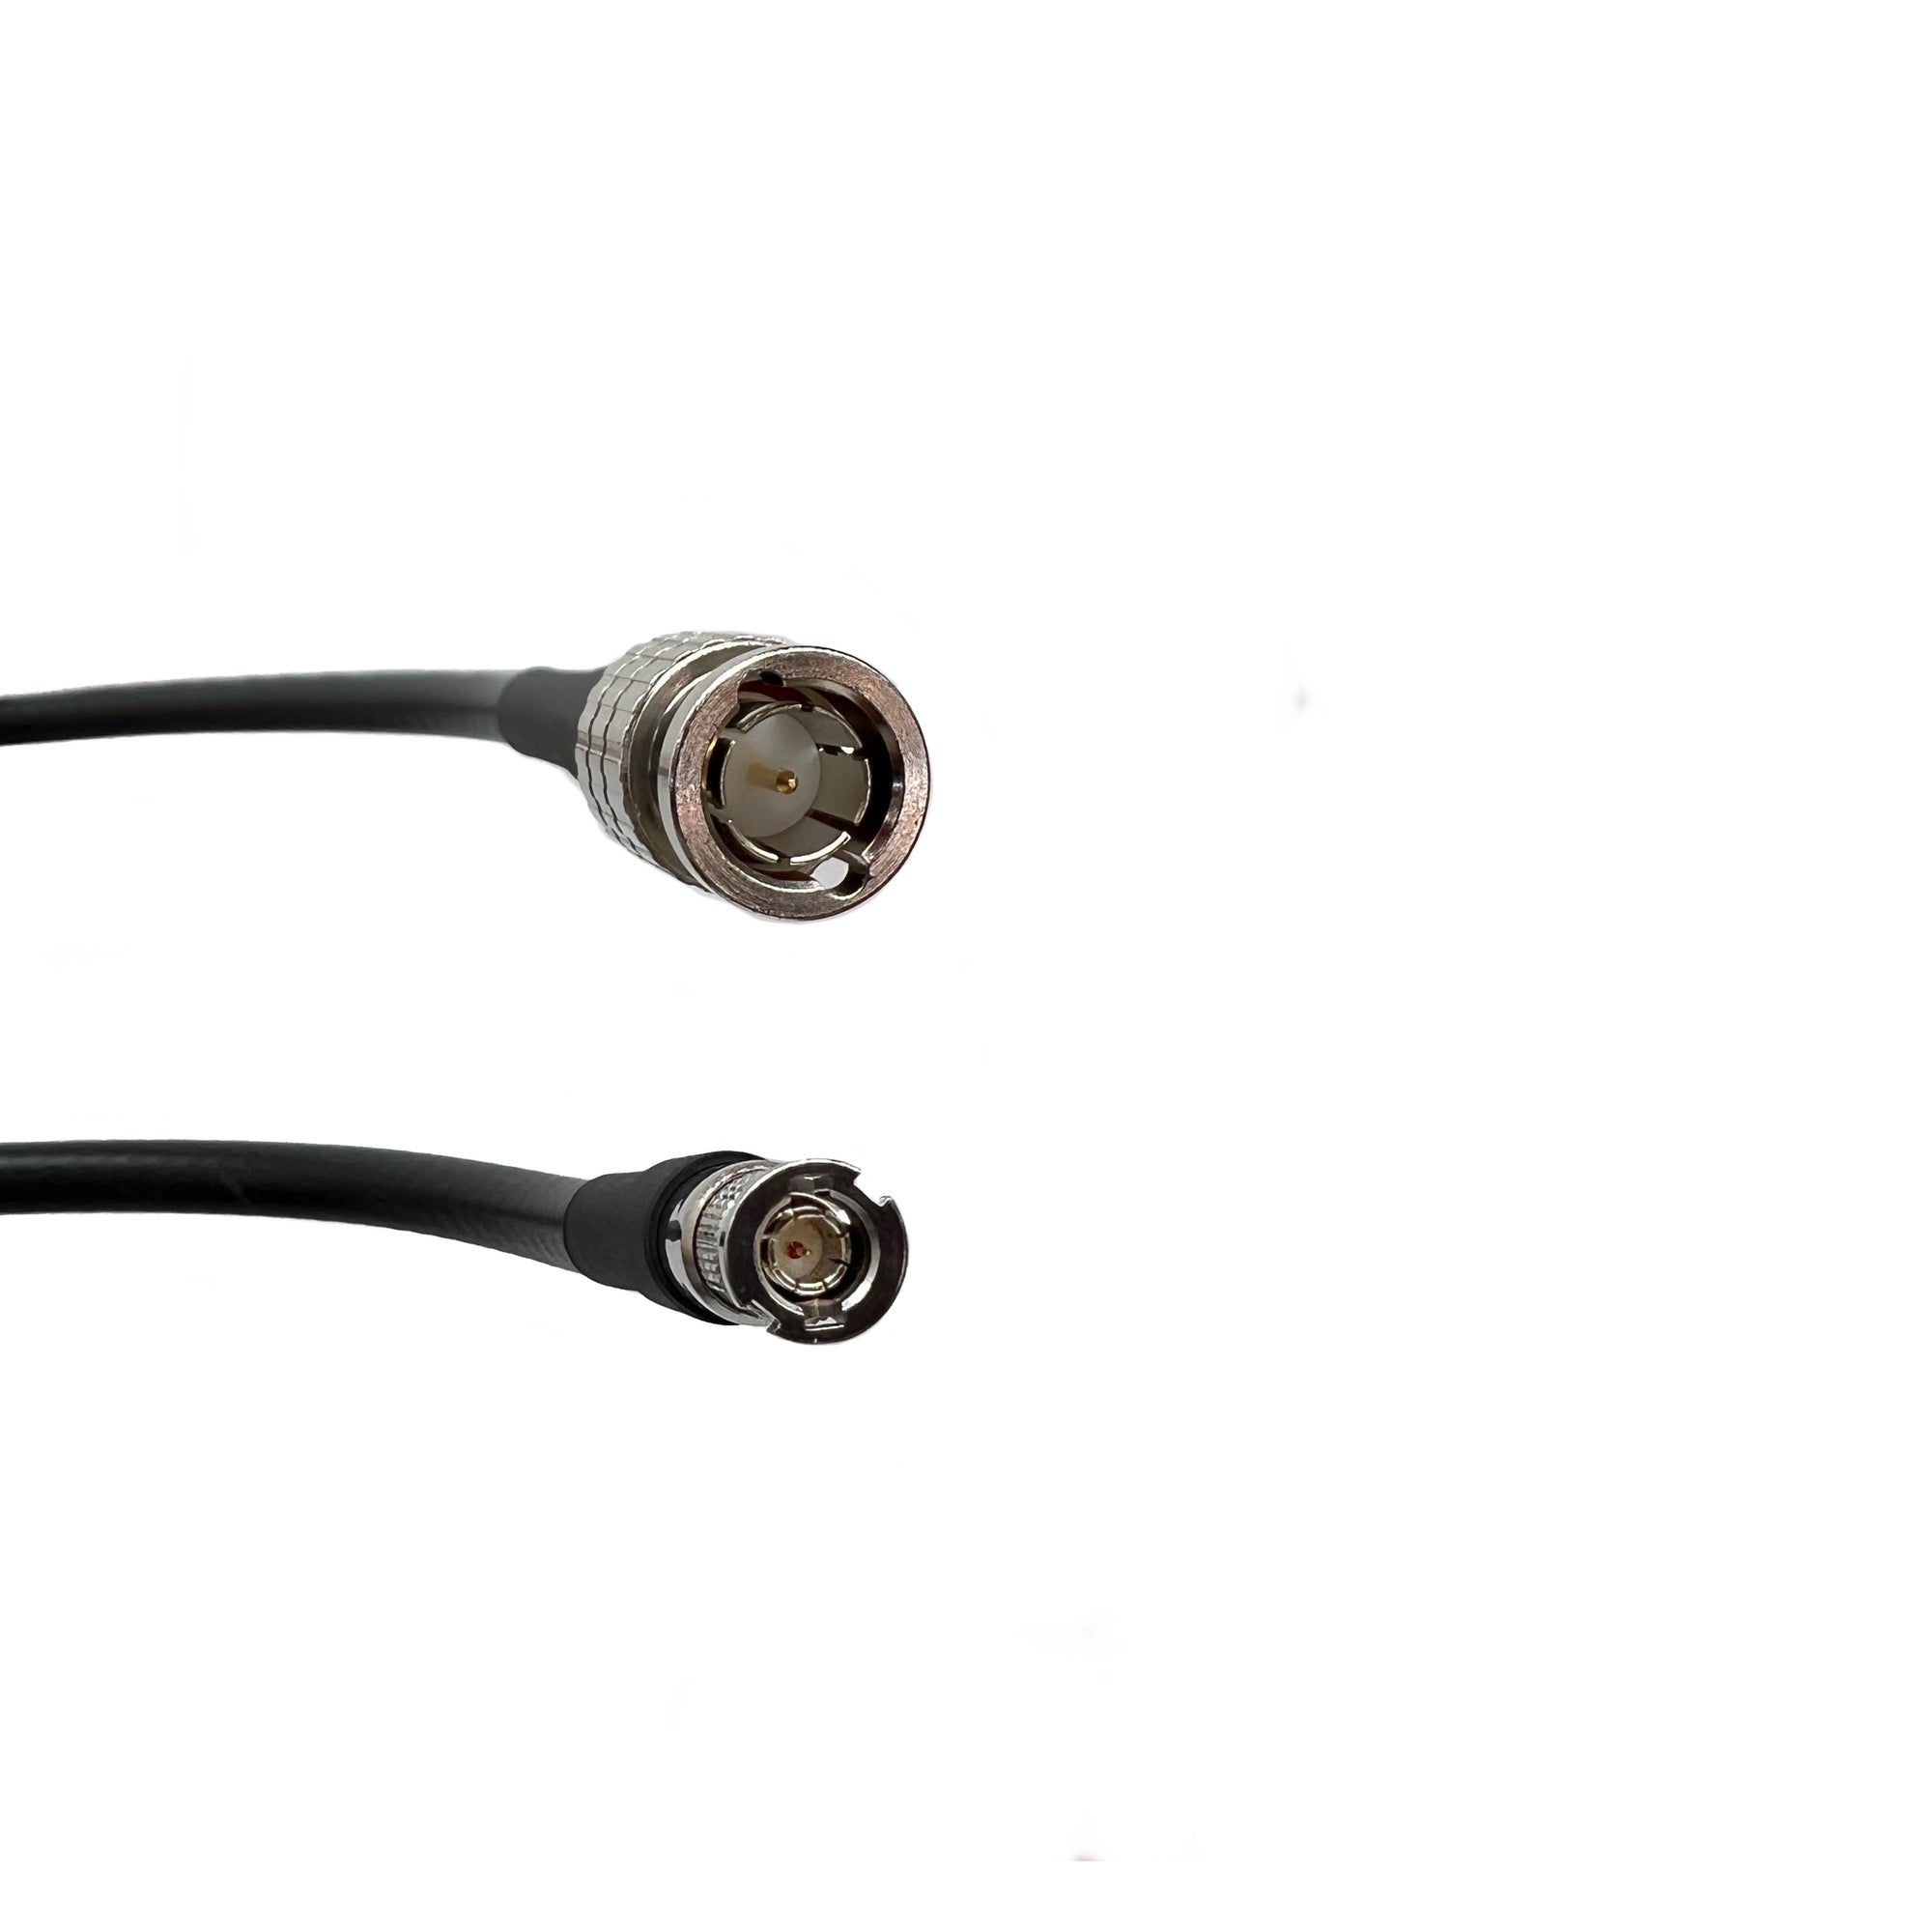 12G High Density BNC Male to BNC Male HD-SDI Cable with Belden 